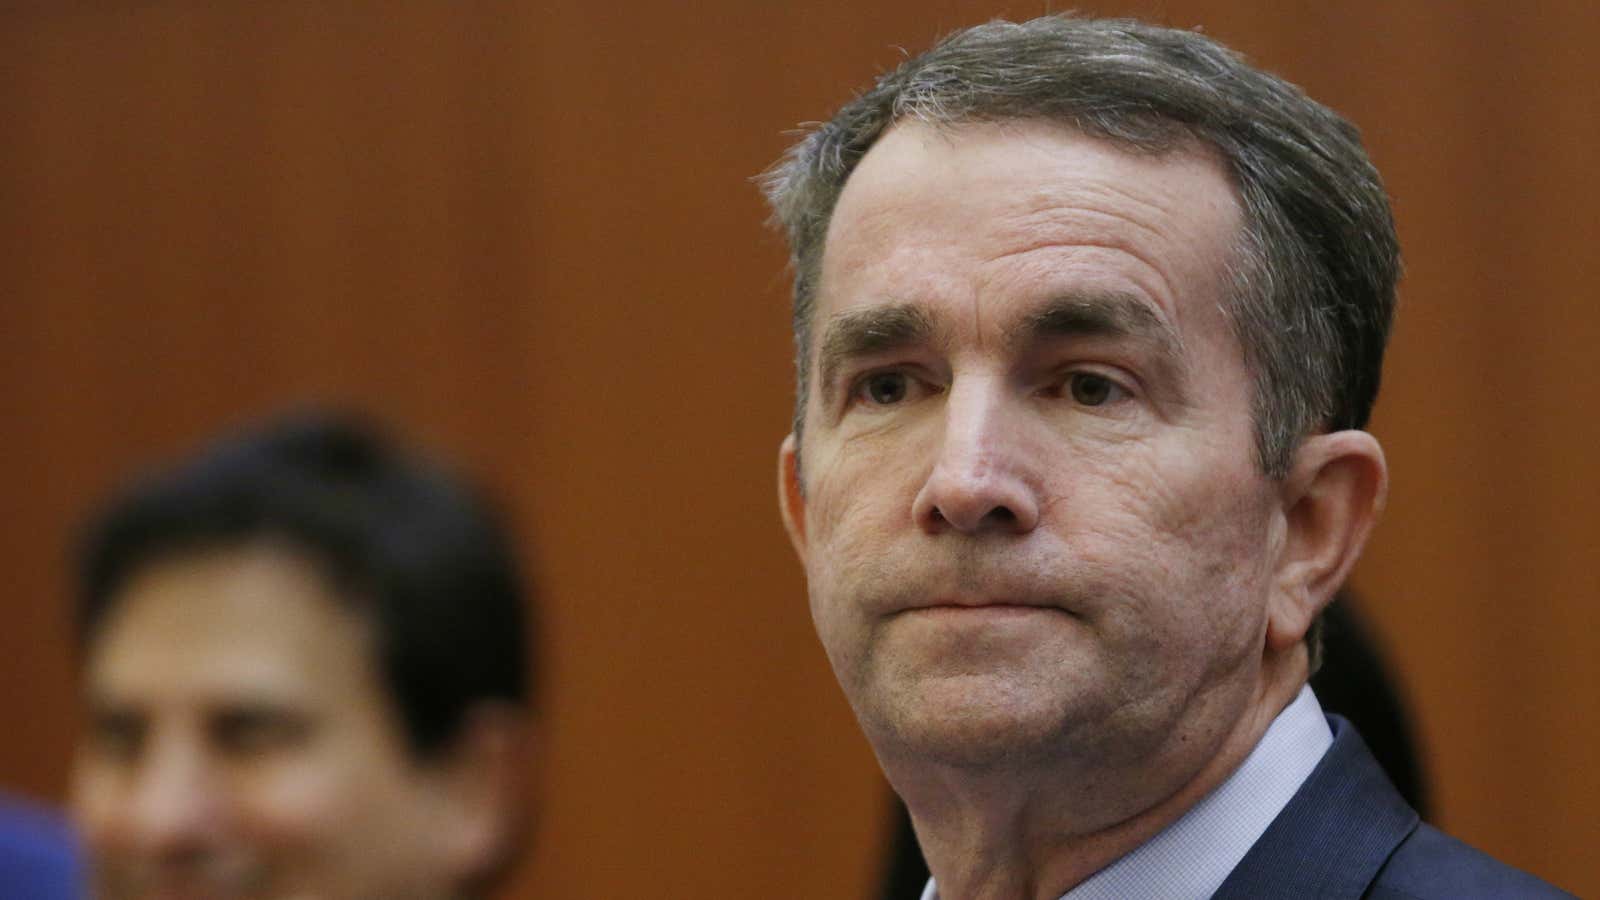 Virginia governor Ralph Northam faces calls to resign from both parties.